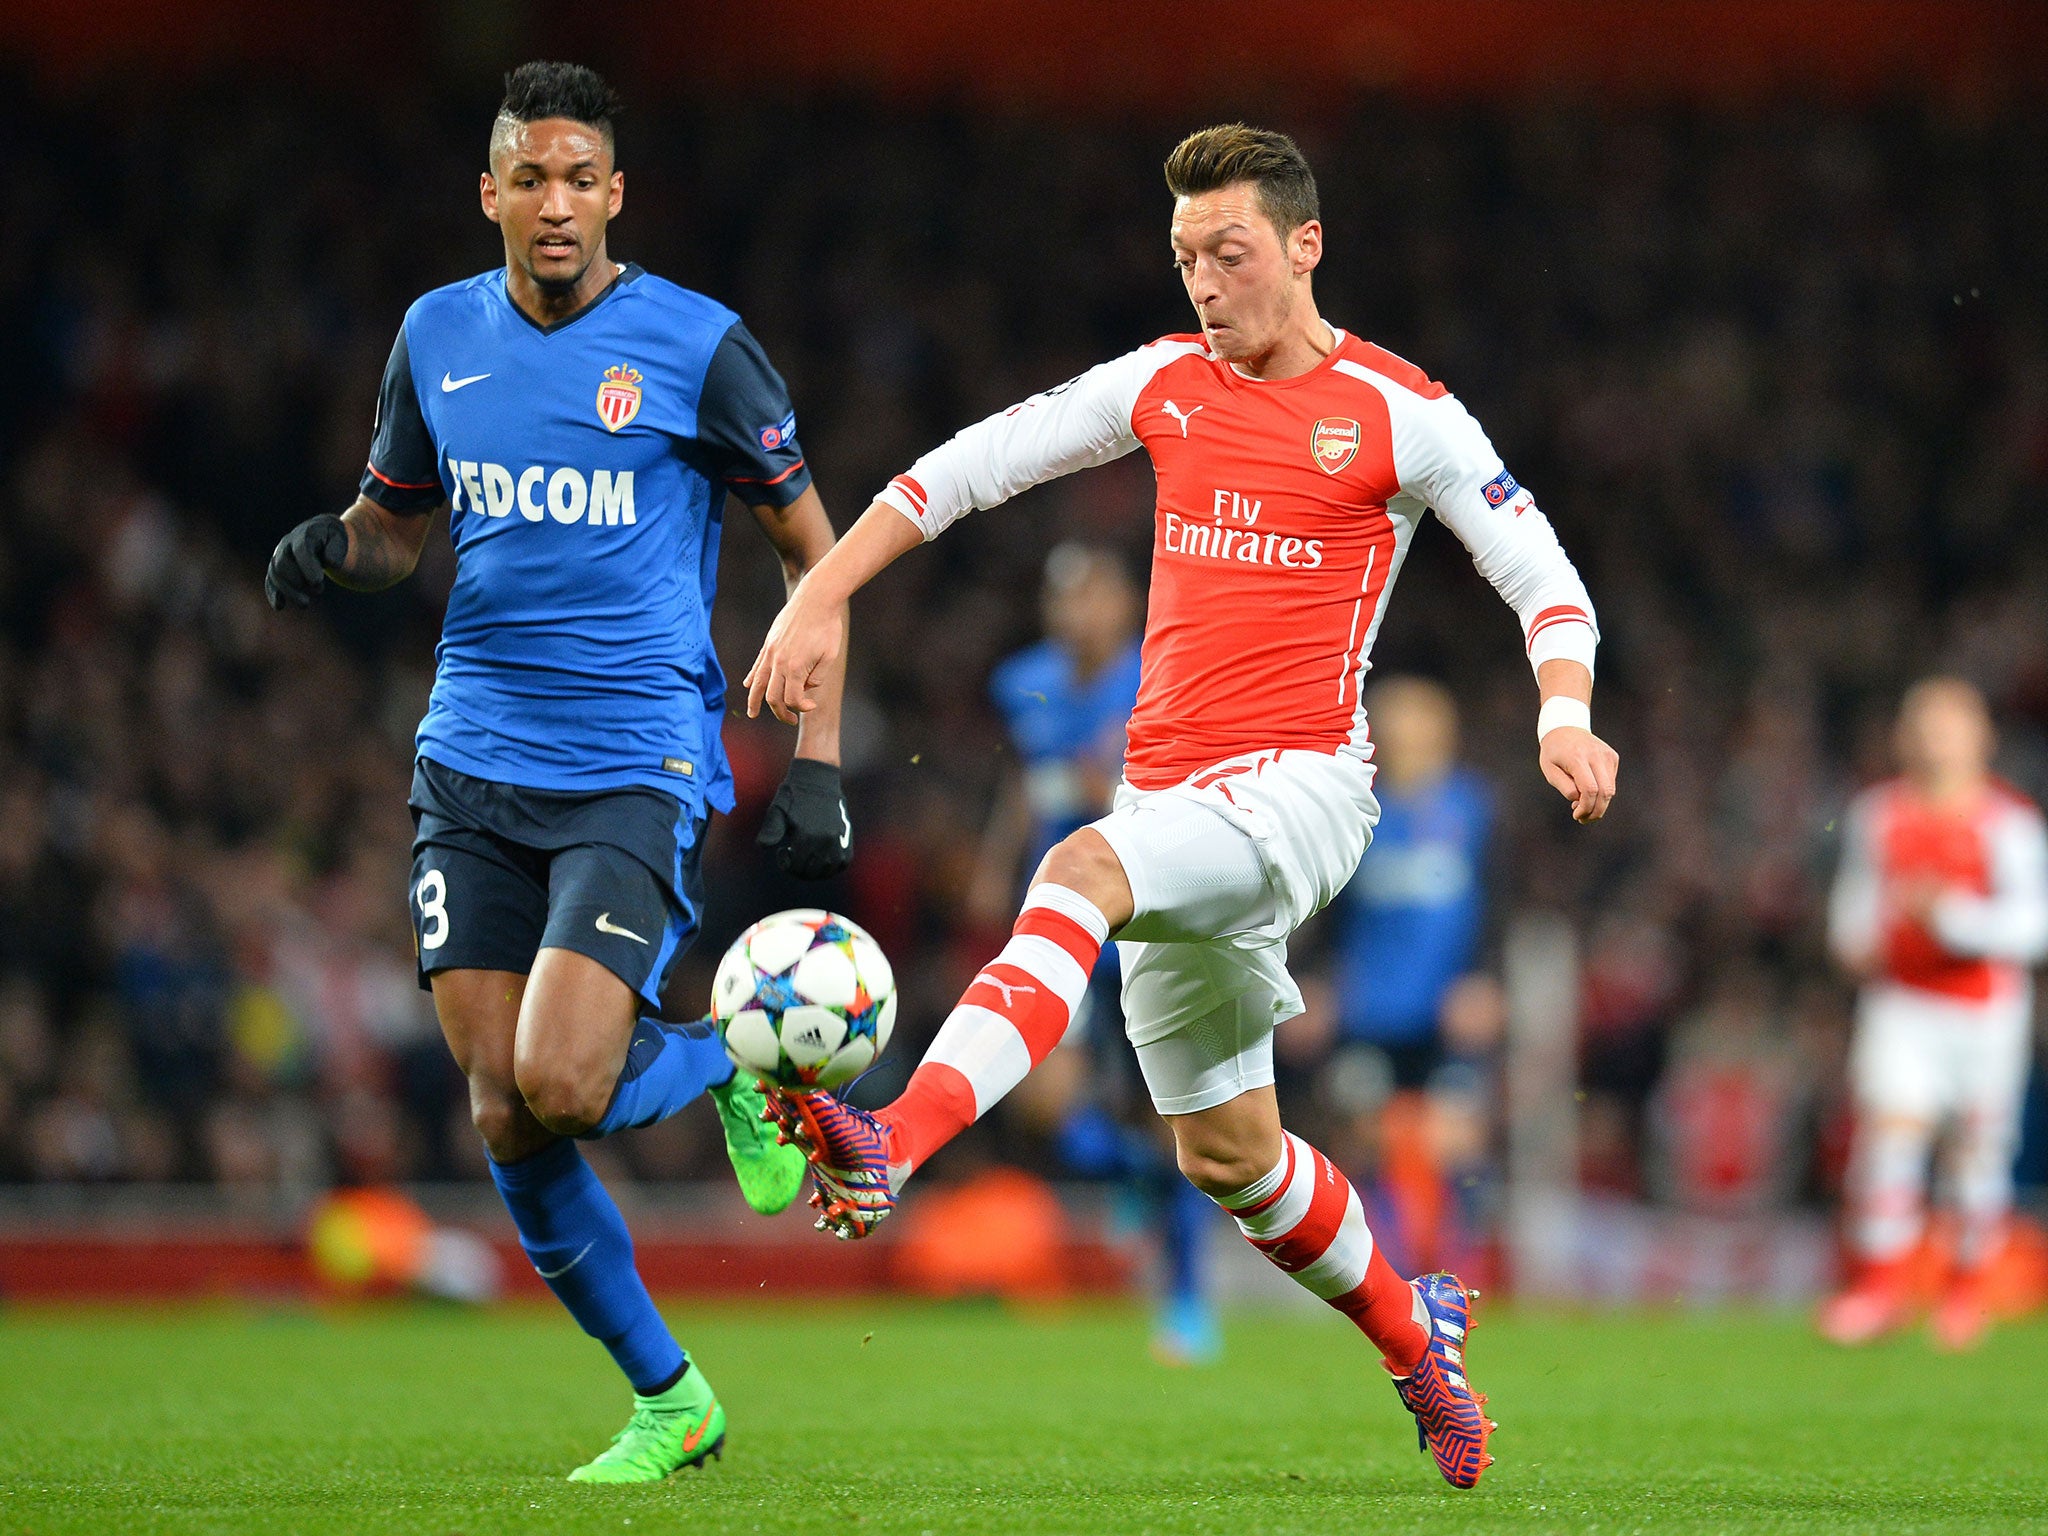 Mesut Ozil in action for the Gunners